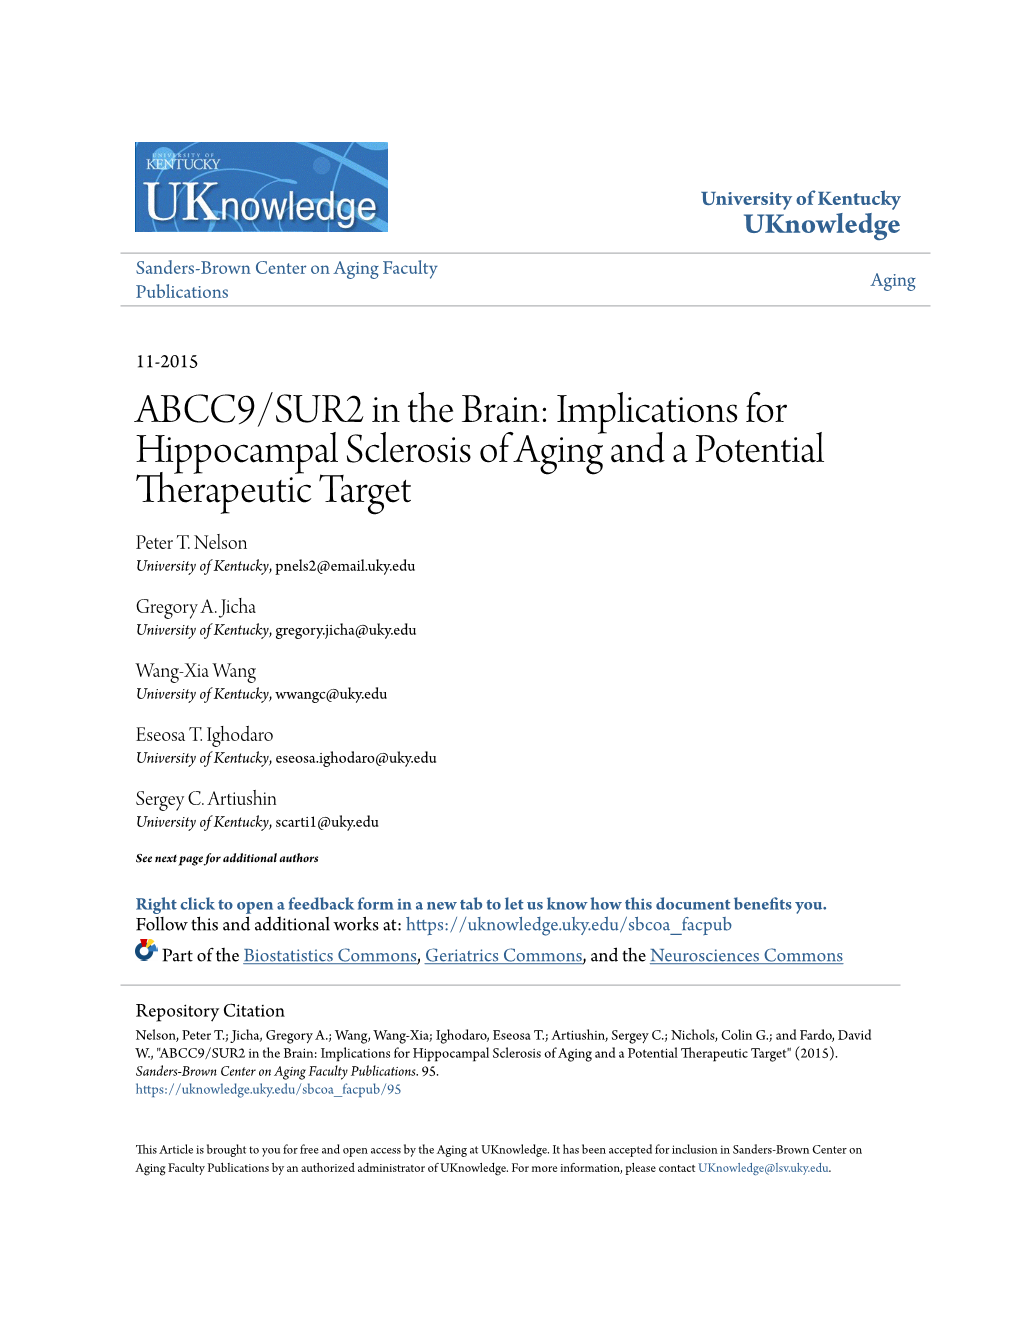 ABCC9/SUR2 in the Brain: Implications for Hippocampal Sclerosis of Aging and a Potential Therapeutic Target Peter T